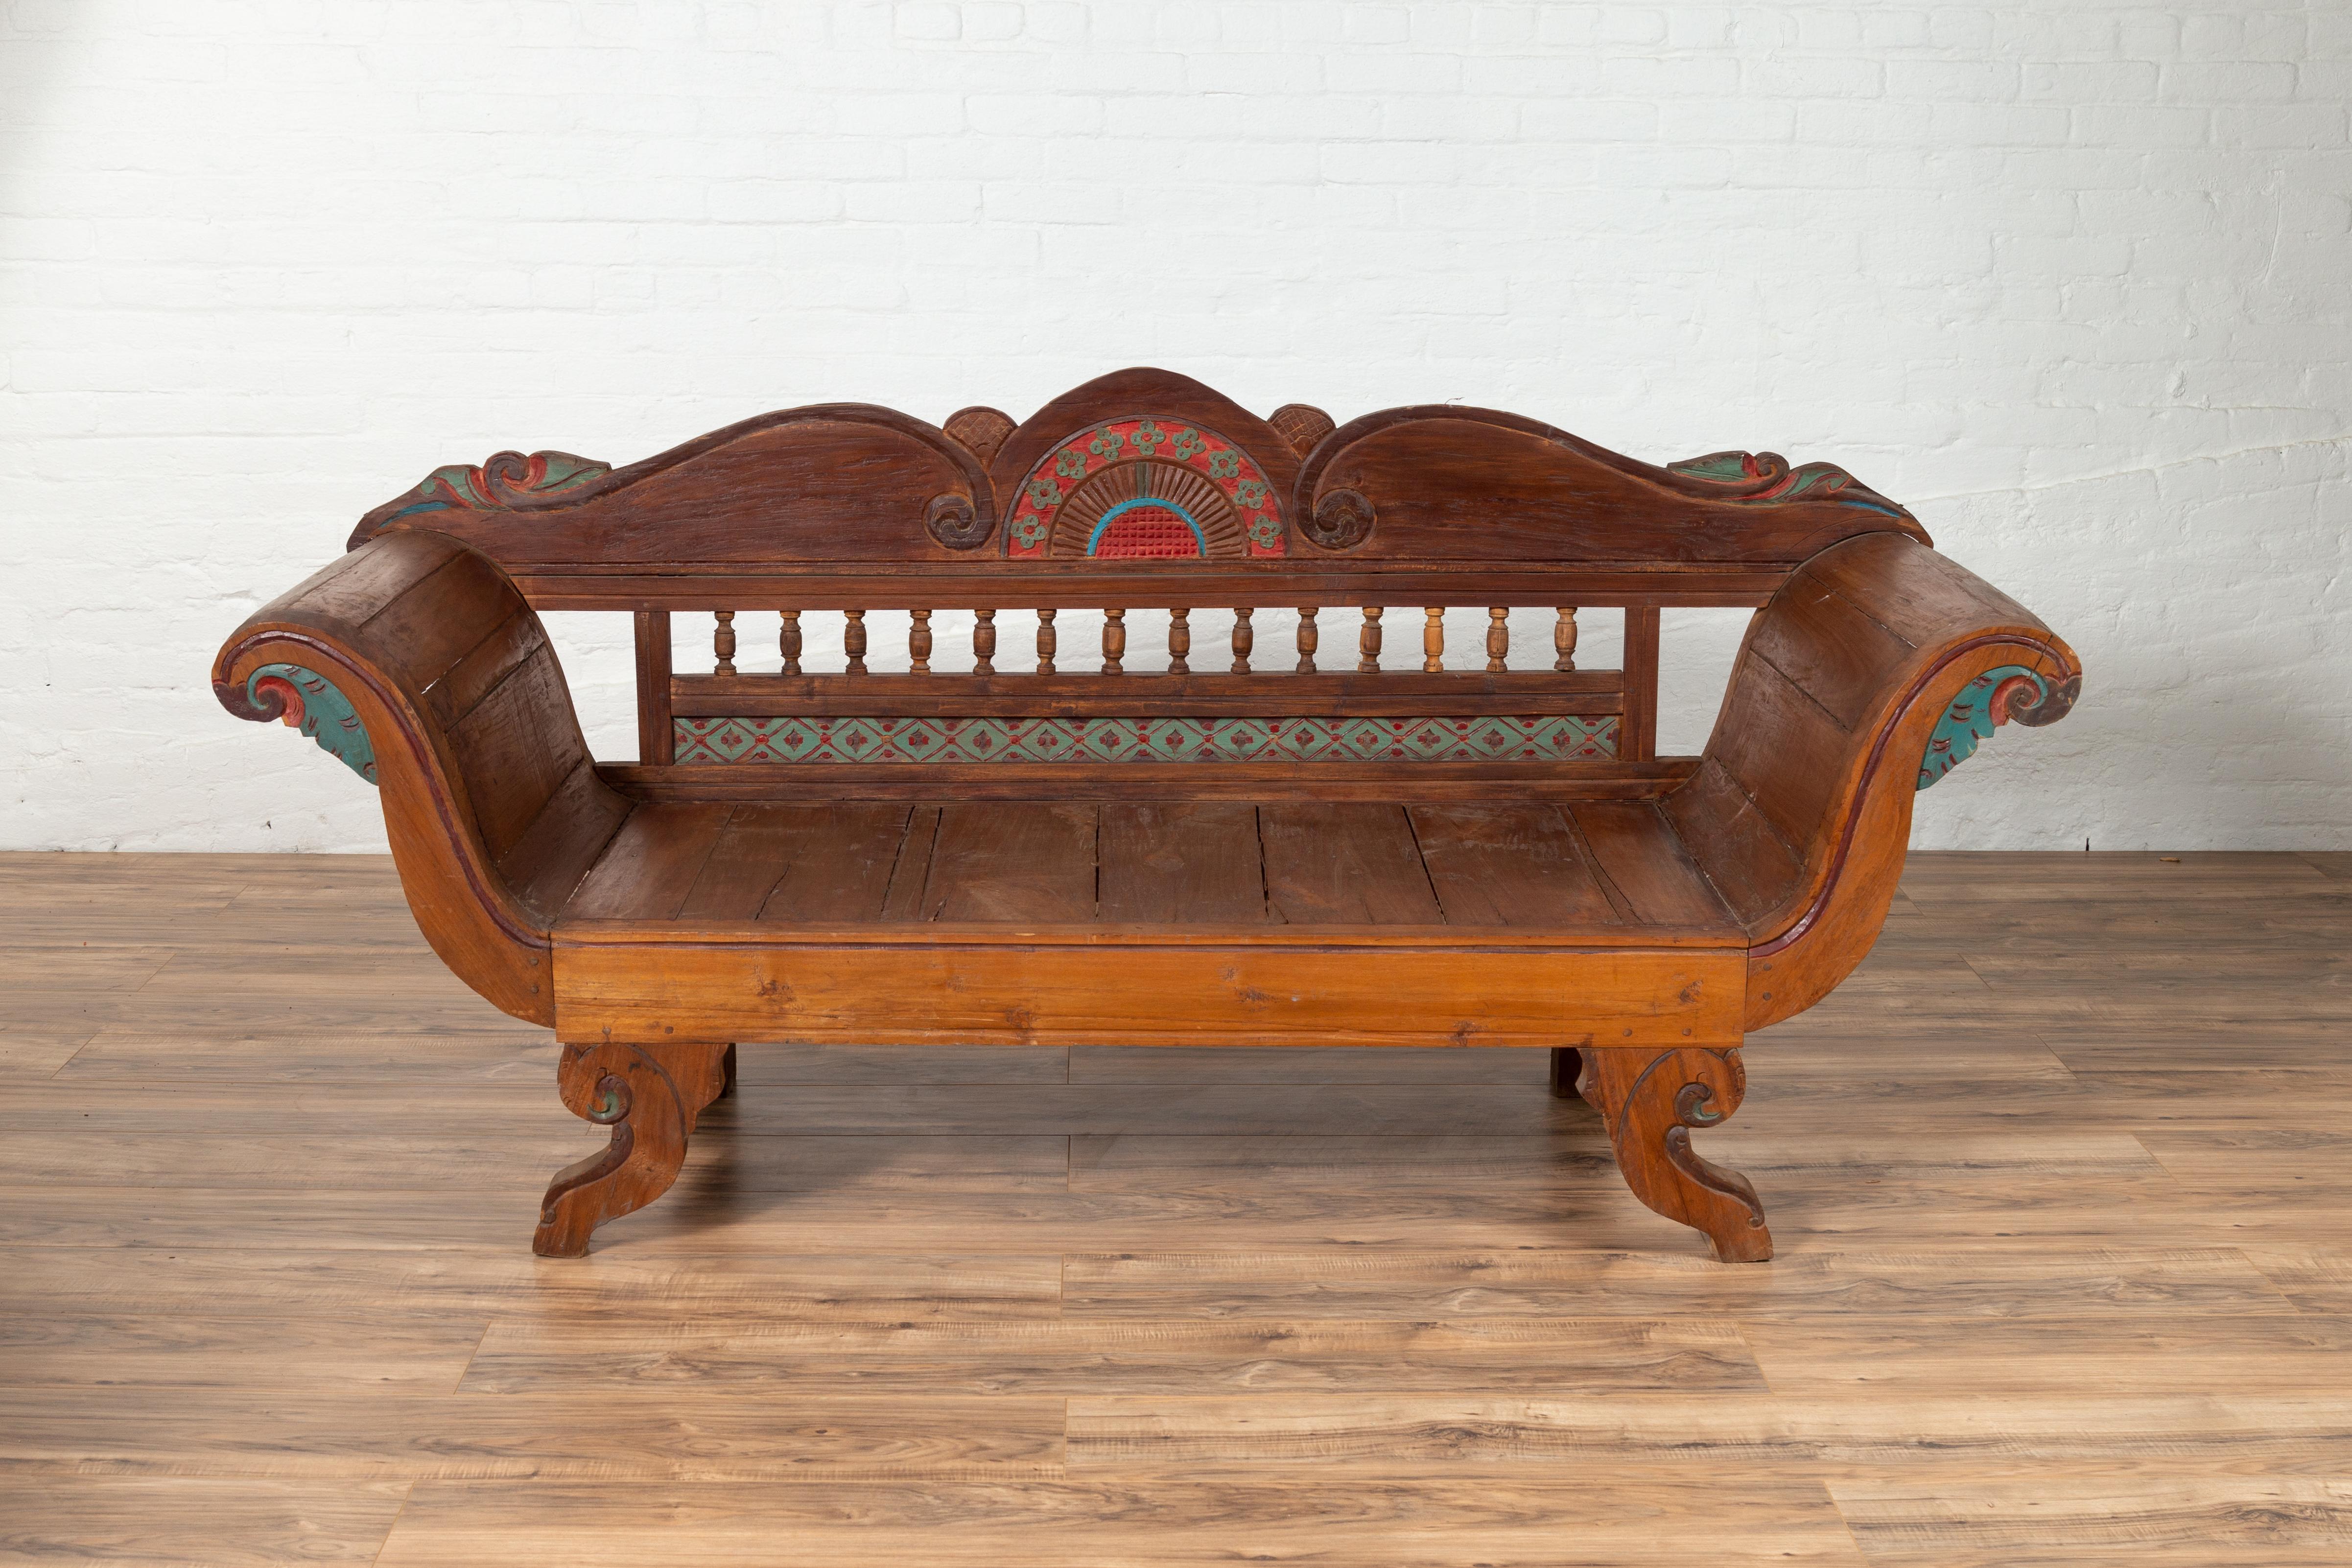 An antique Javanese teak wood plantation settee from the early 20th century, with hand painted décor, carved volutes and out-scrolling arms. Born in Java during the early 20th century, this exquisite teak wood settee can sit three people. Our eye is